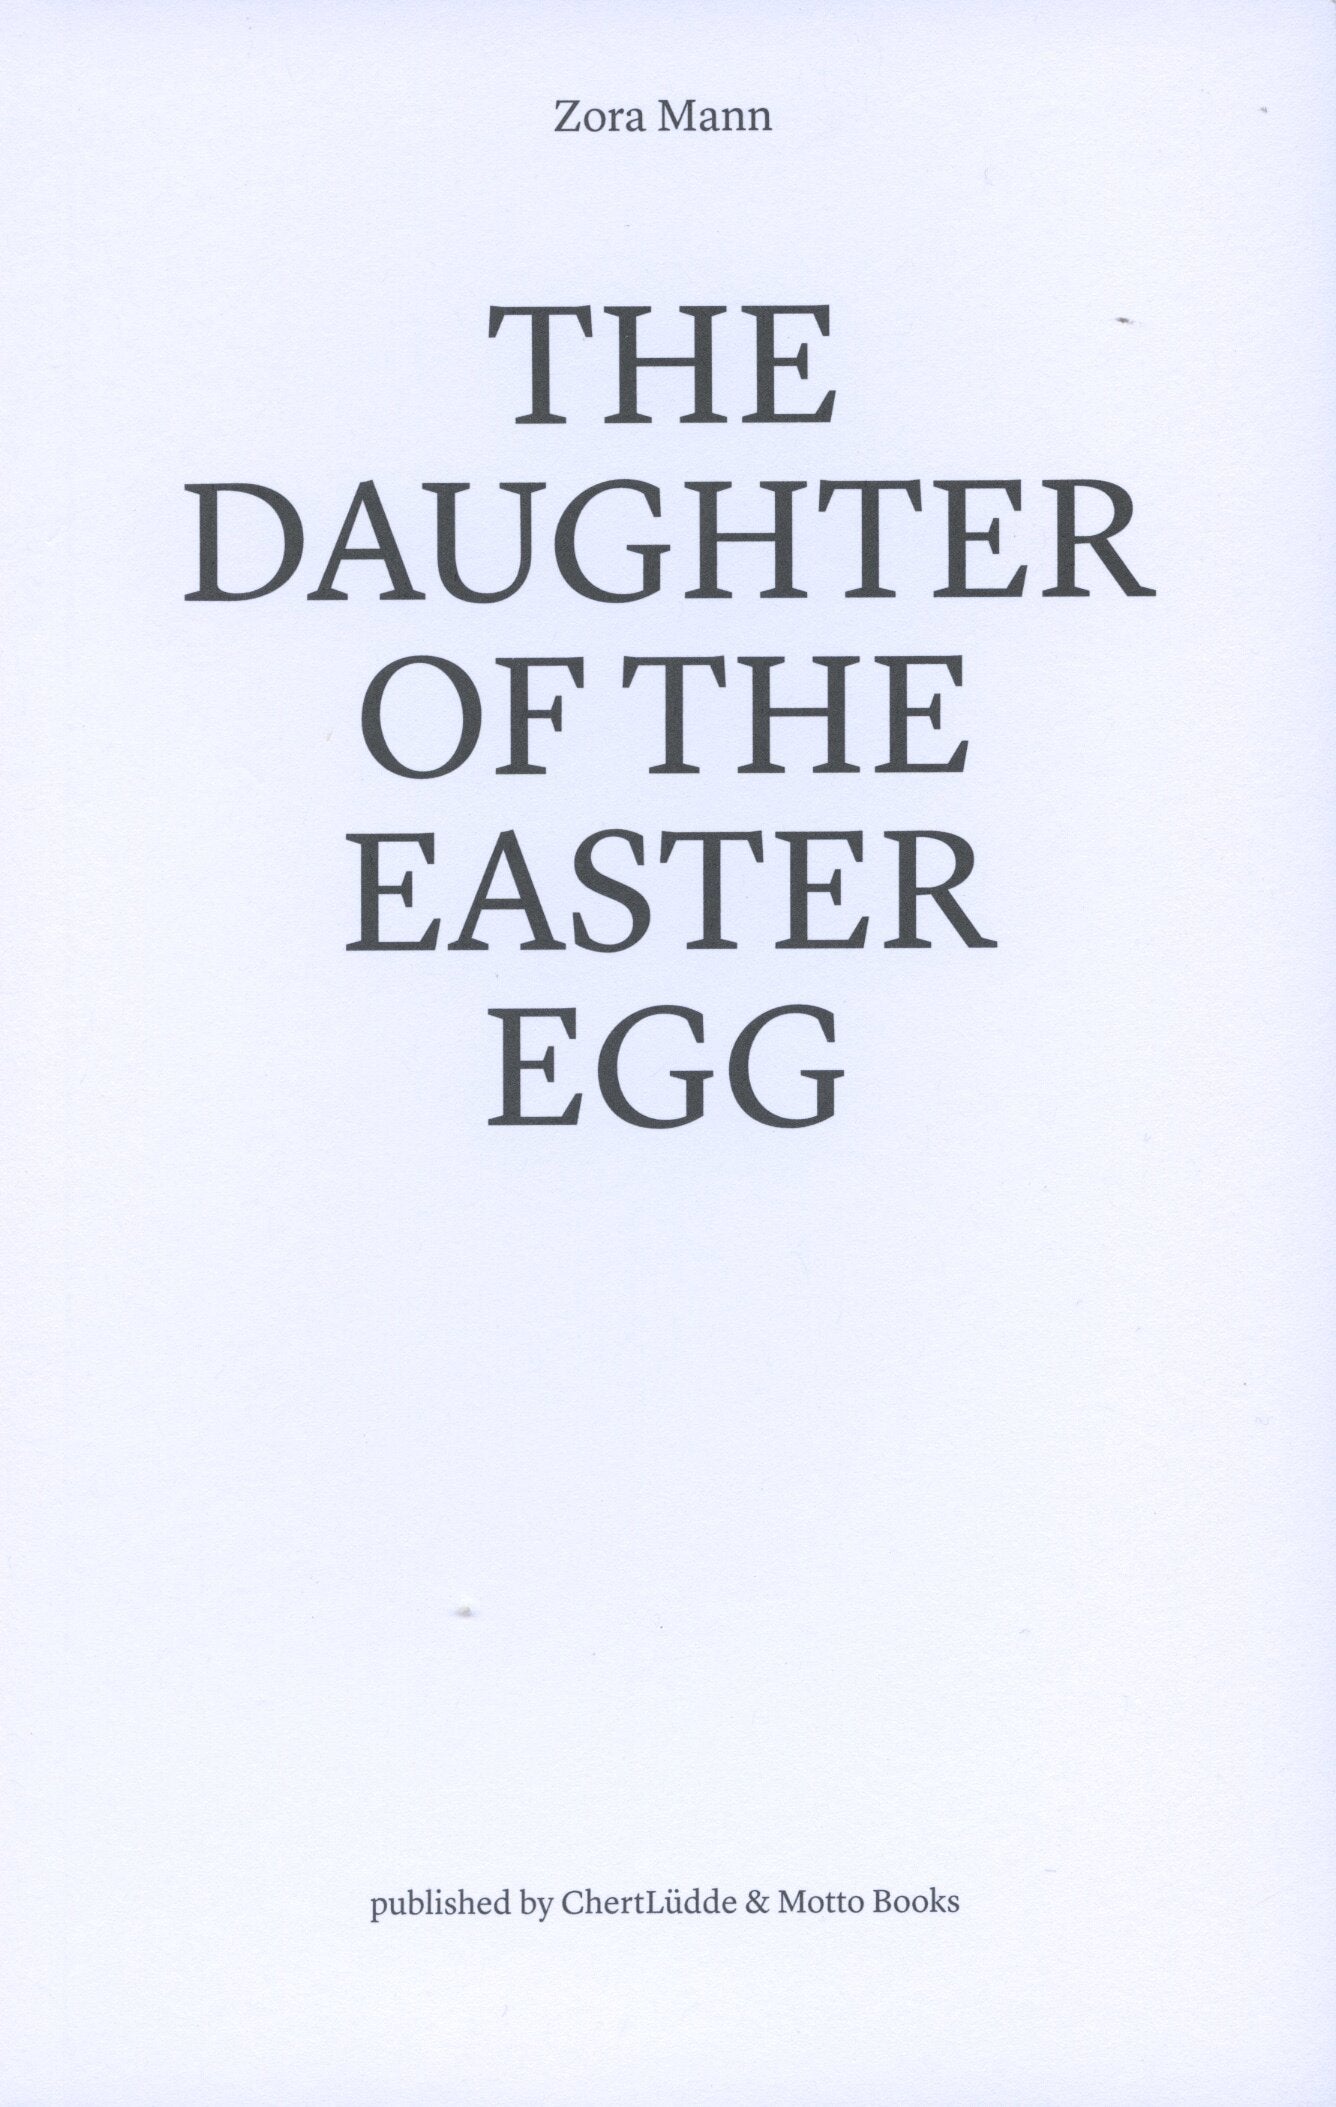 The Daughter of the Easter Egg - Zora Mann